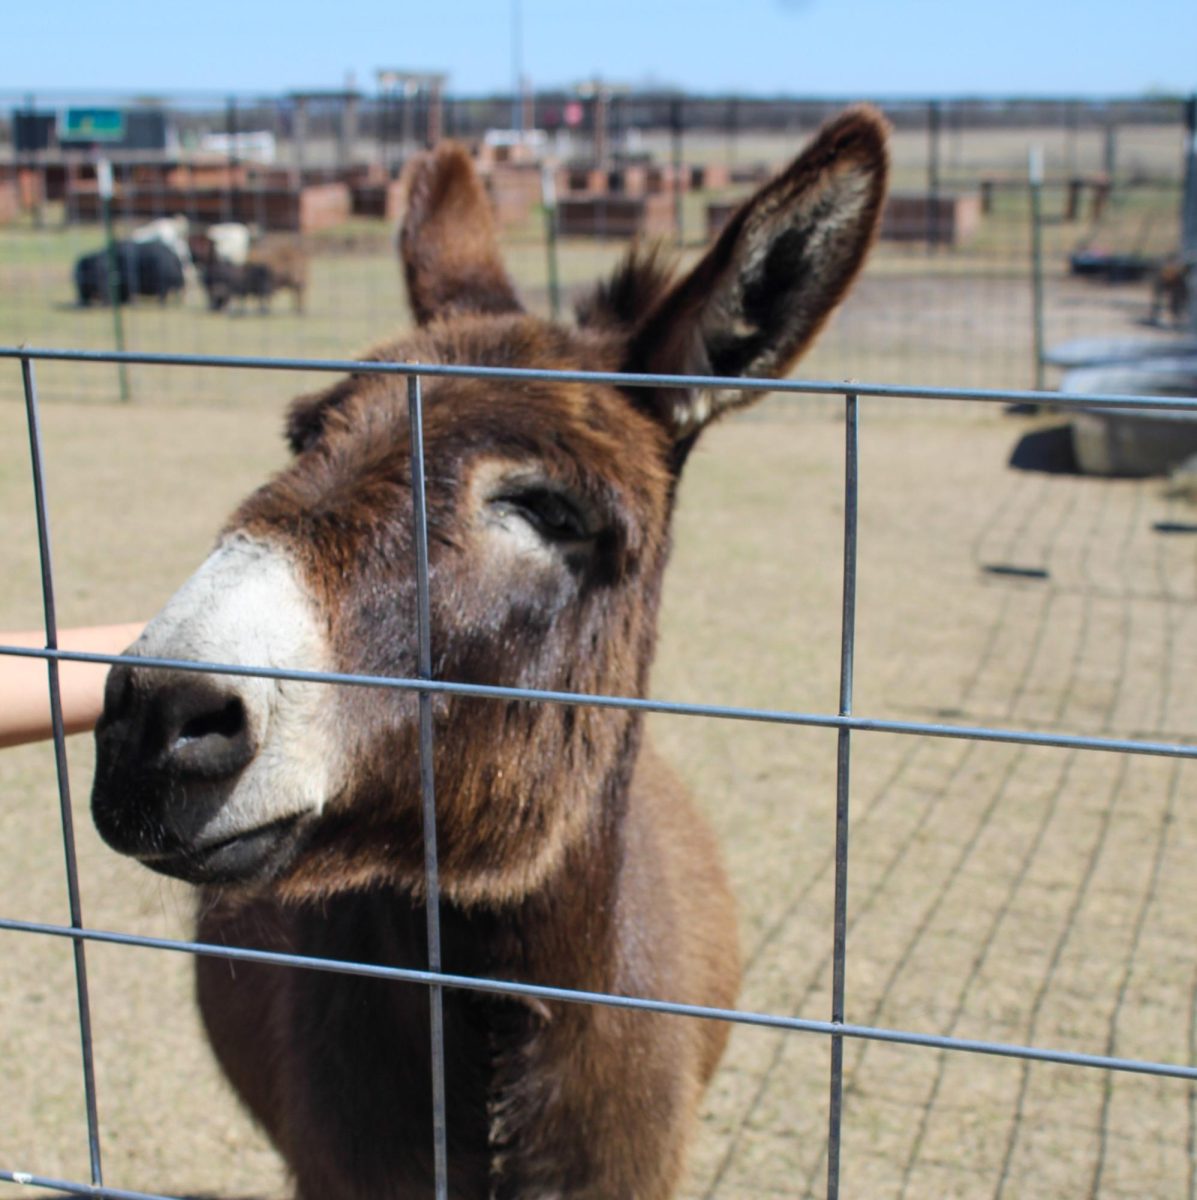 Jerry the miniature donkey has recently joined the other animals on the farm on a permanent loan.